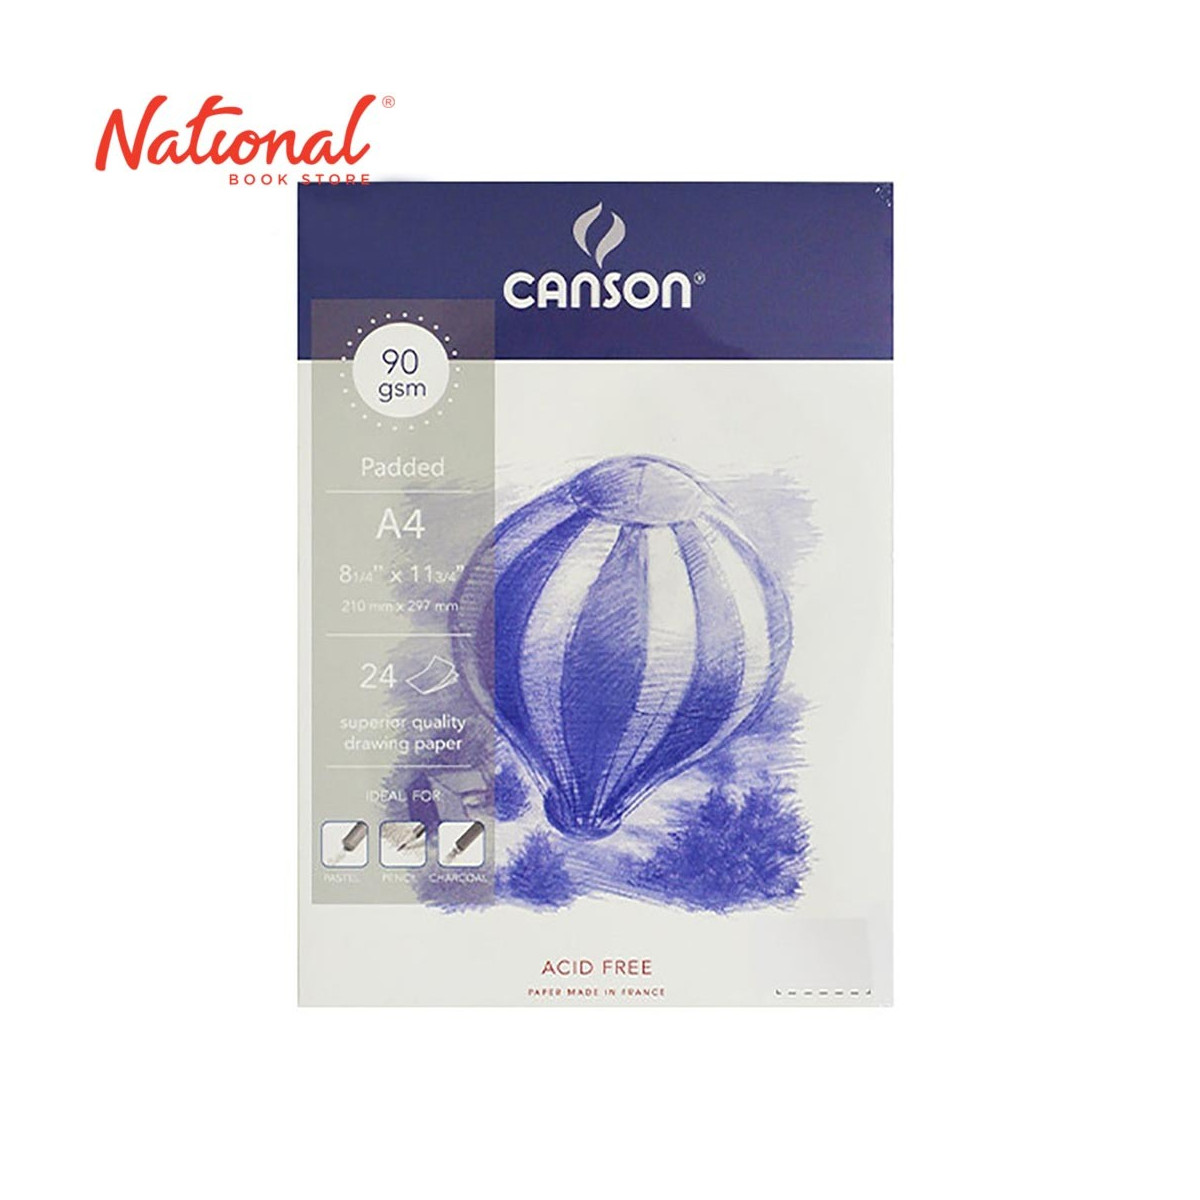 CANSON BALLOON SKETCH PAD A4 24 SHEETS